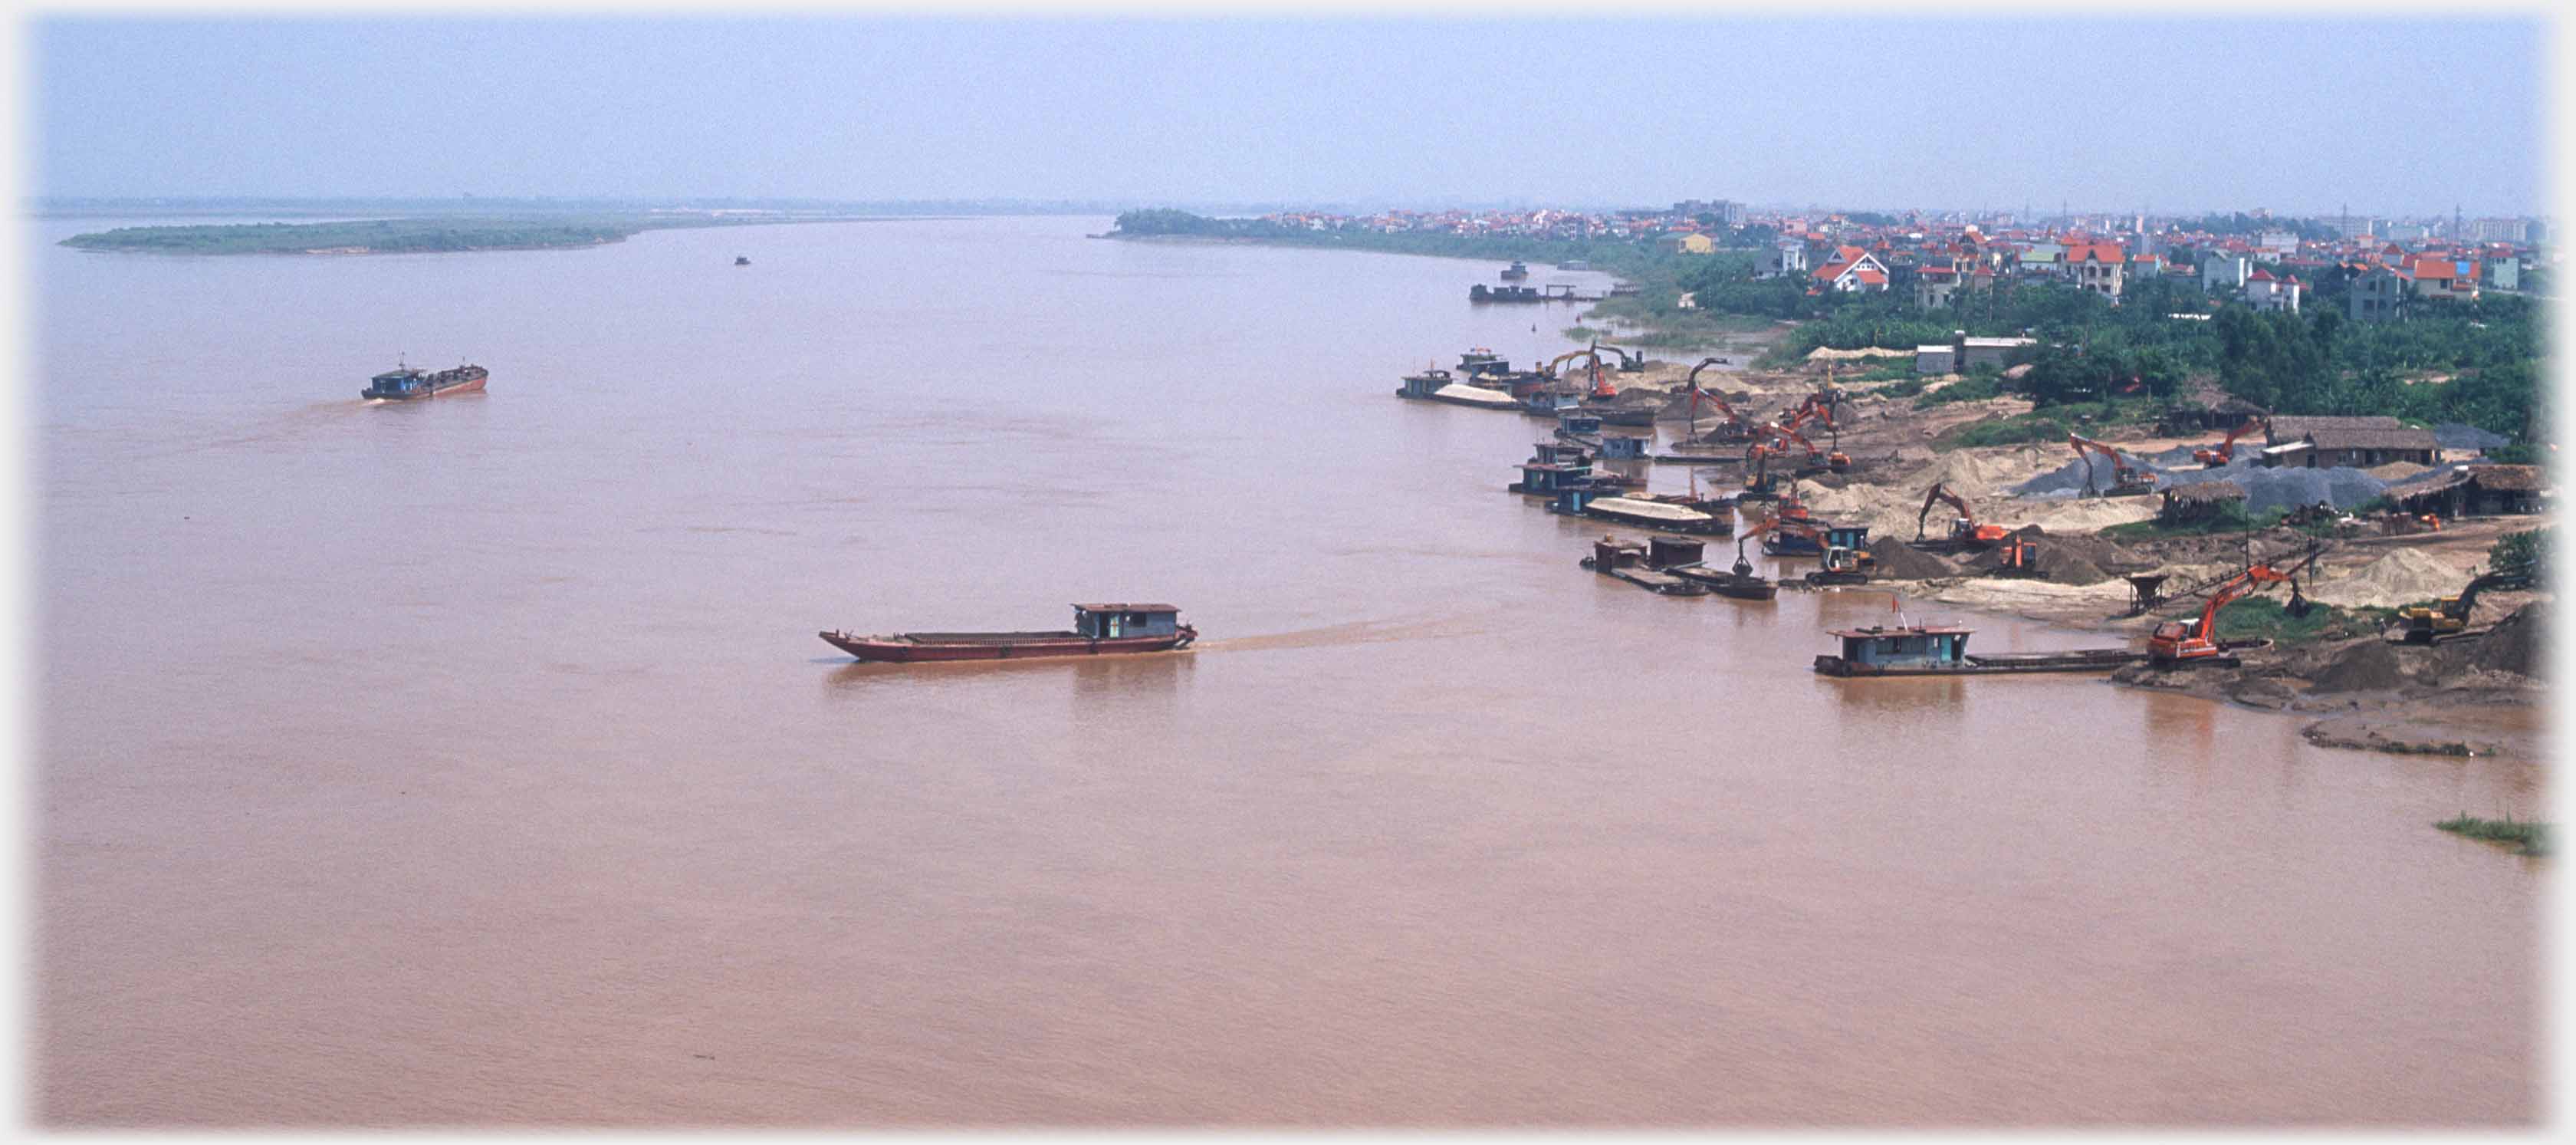 Two barges on wide river with diggers unloading at river bank on right.